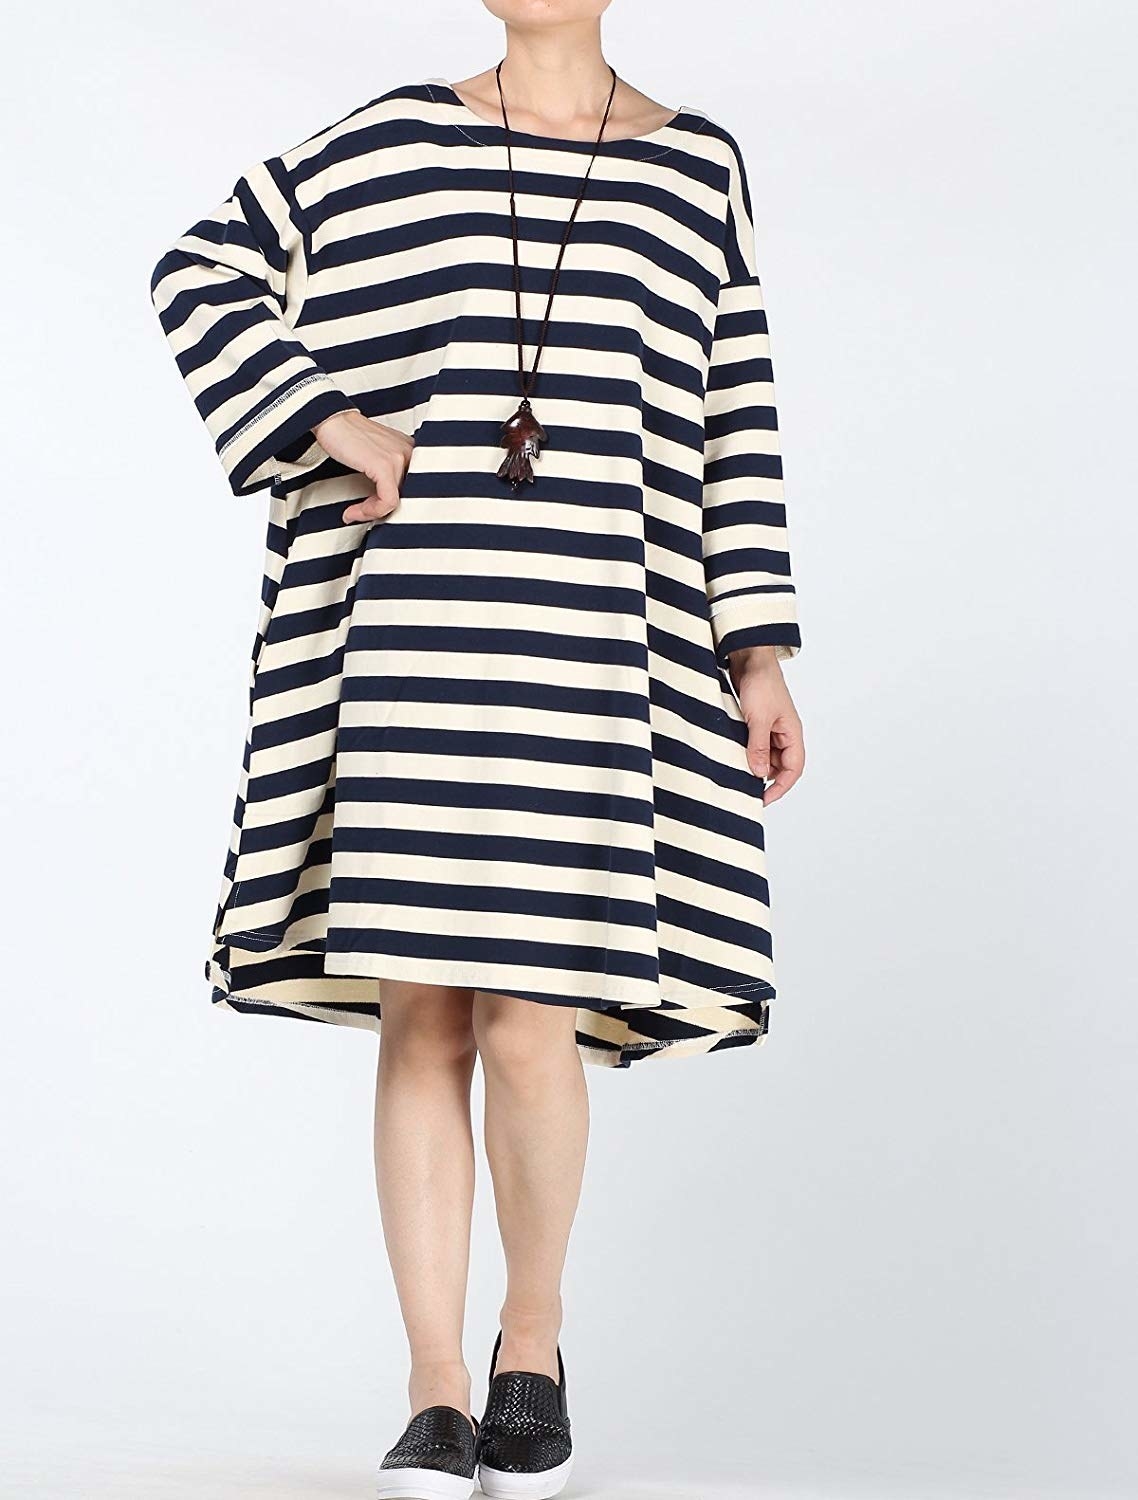 long sleeve striped dress that hits at the knee 